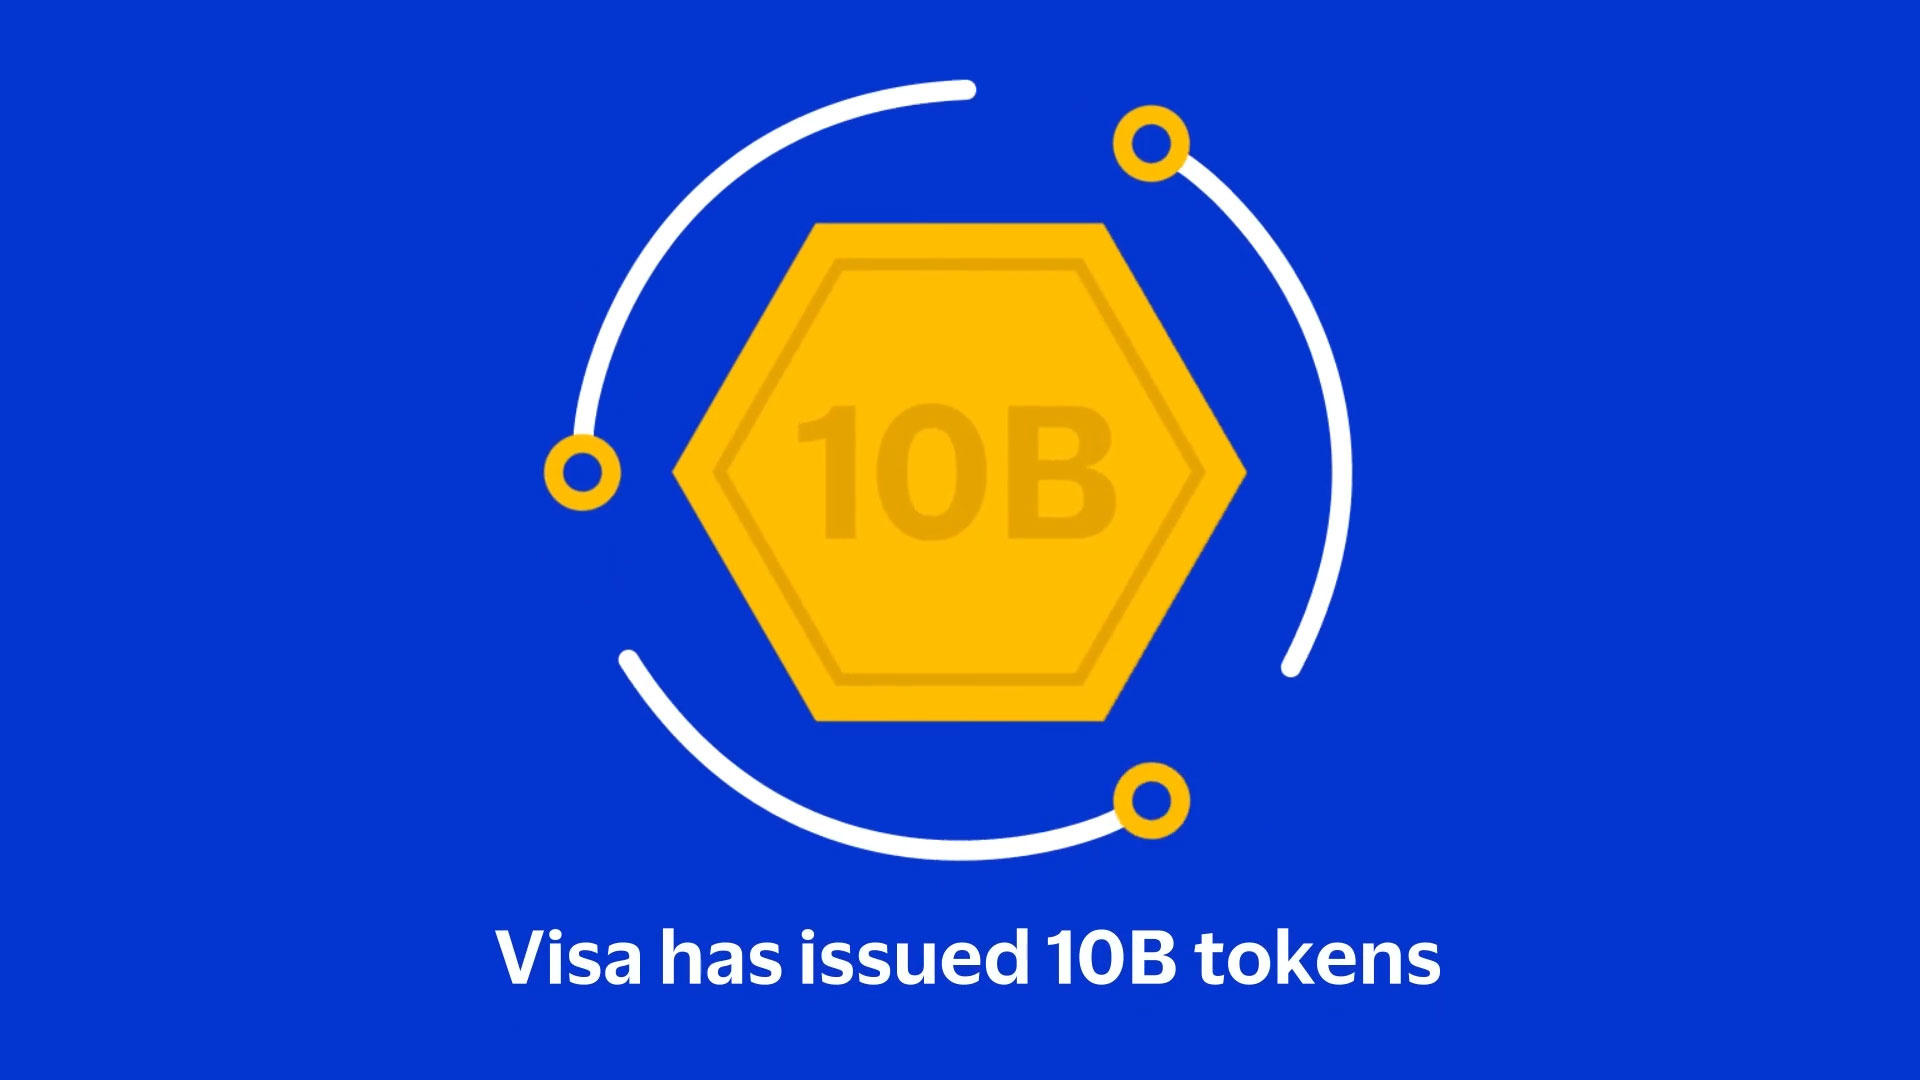 Visa announces it has issued more than 10 billion tokens since the technology was launched in 2014.